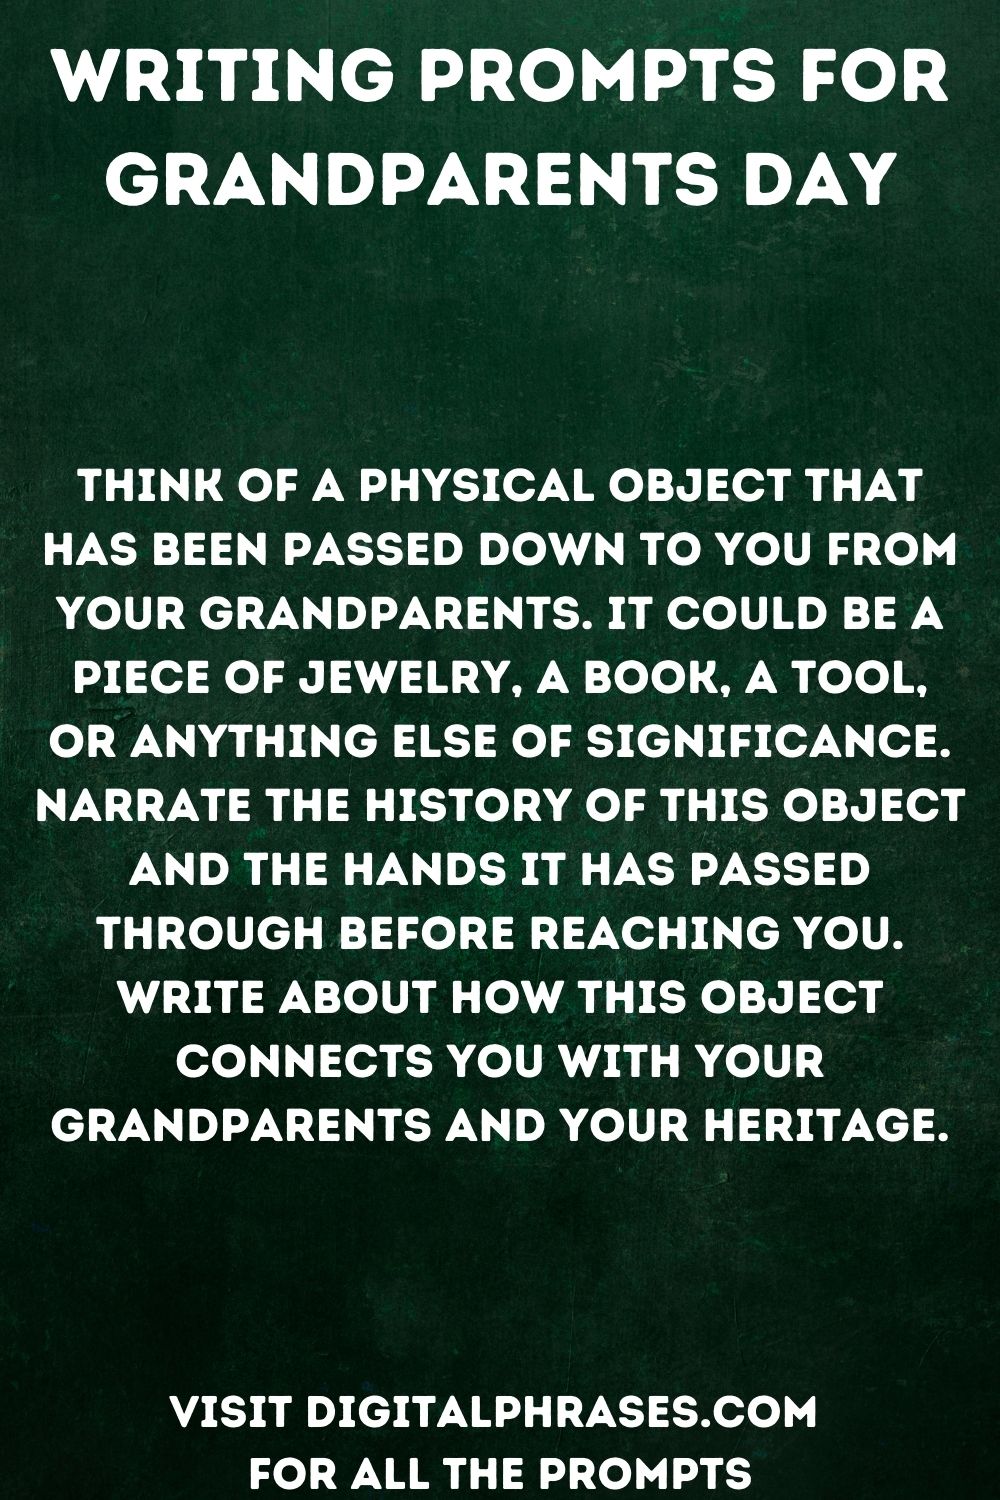 28 Writing Prompts For Grandparents Day